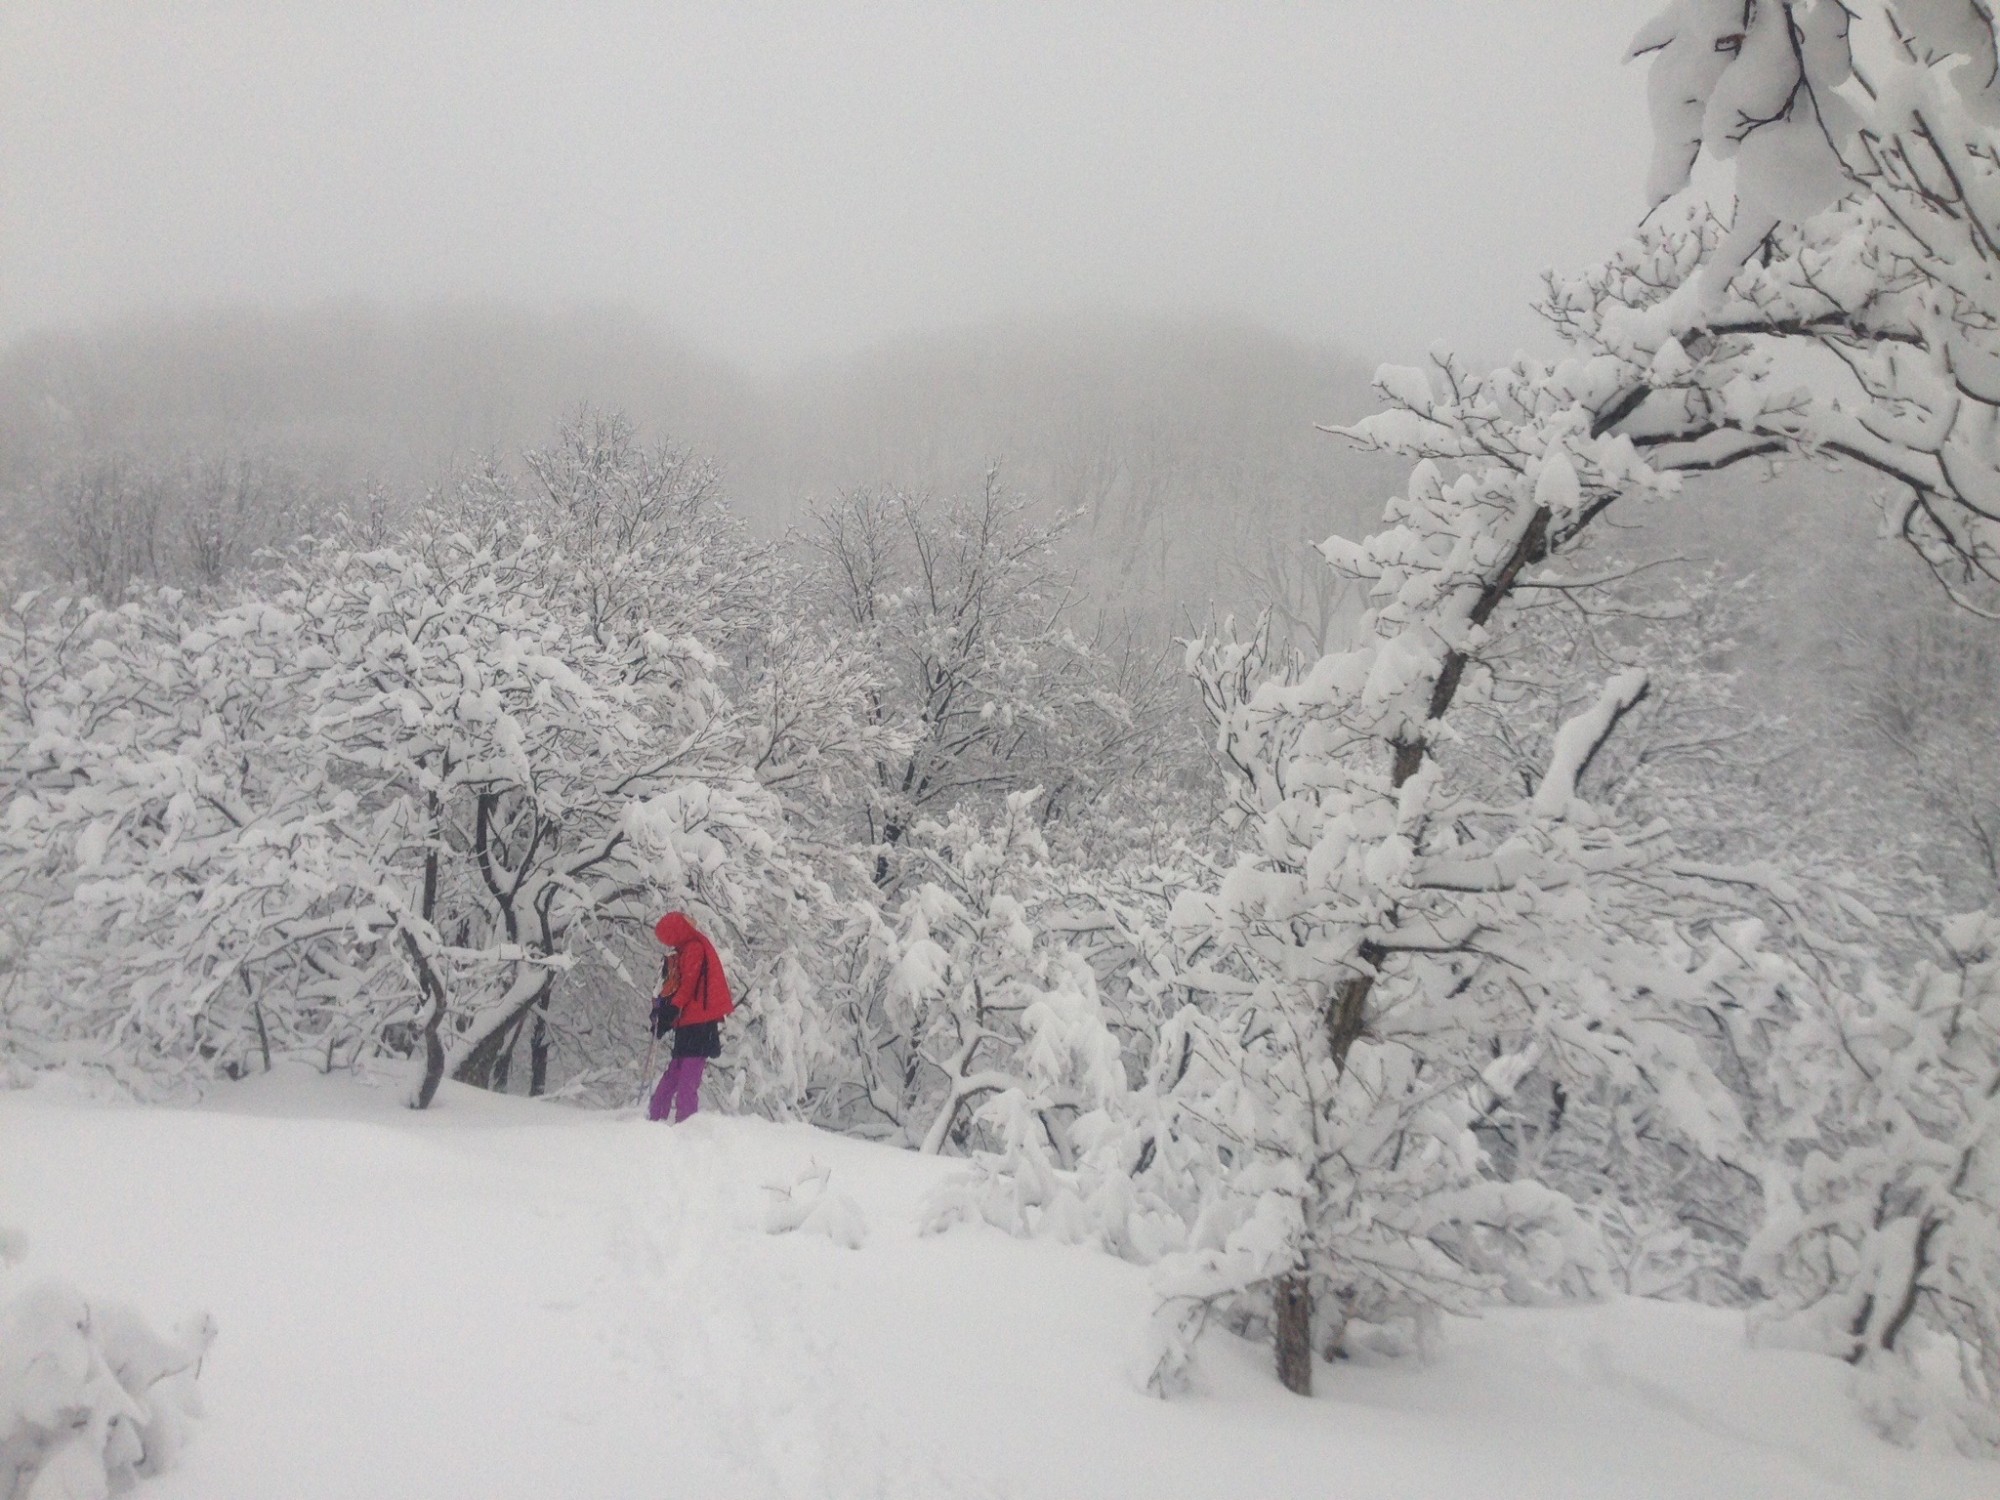 snow covered trees in a snowstorm and woman in background